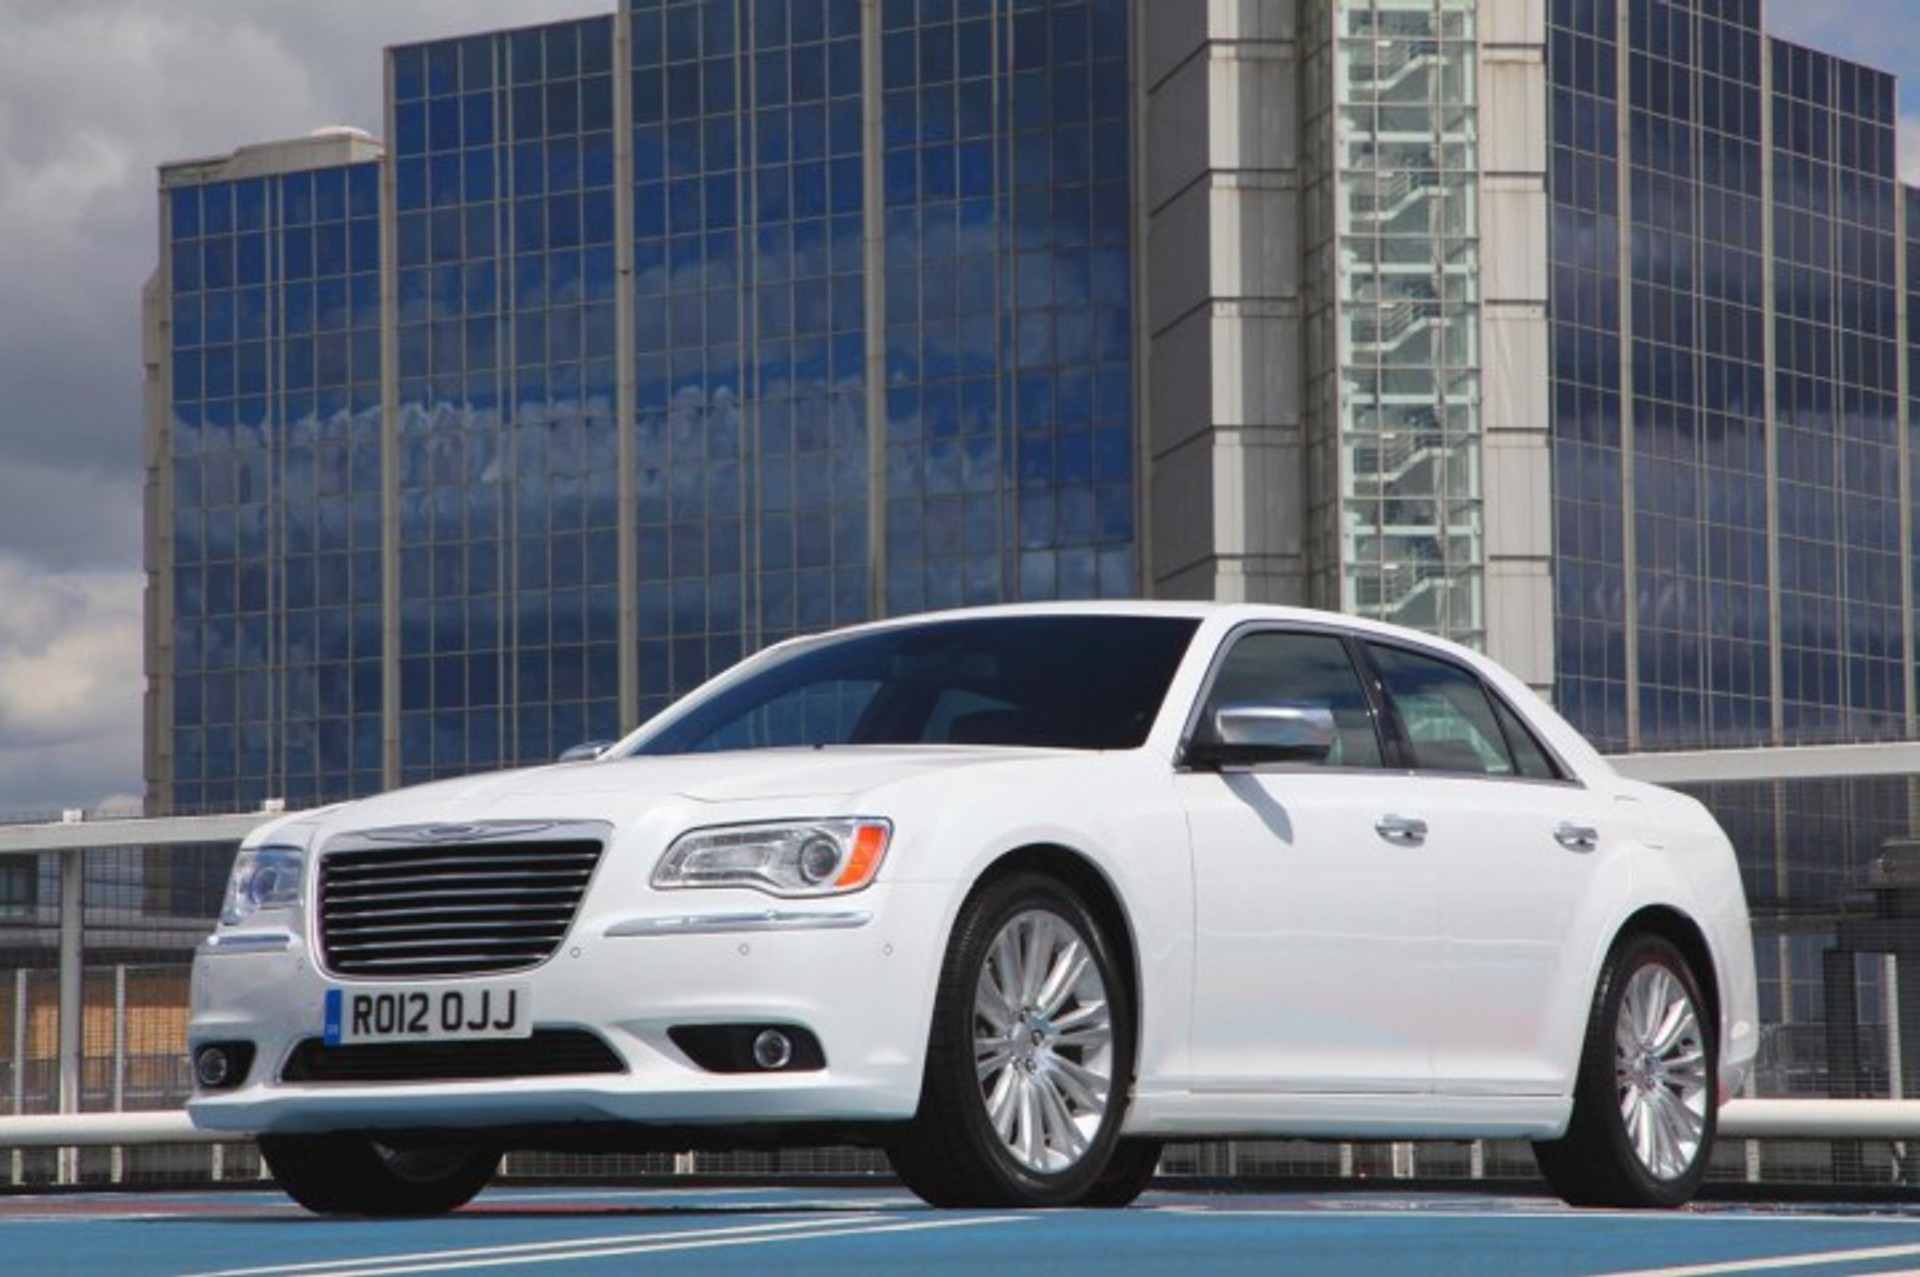 UK PUBLIC DEBUTS FOR CHRYSLER 300C AND JEEP GRAND CHEROKEE SRT AT CANARY WHARF MOTOREXPO